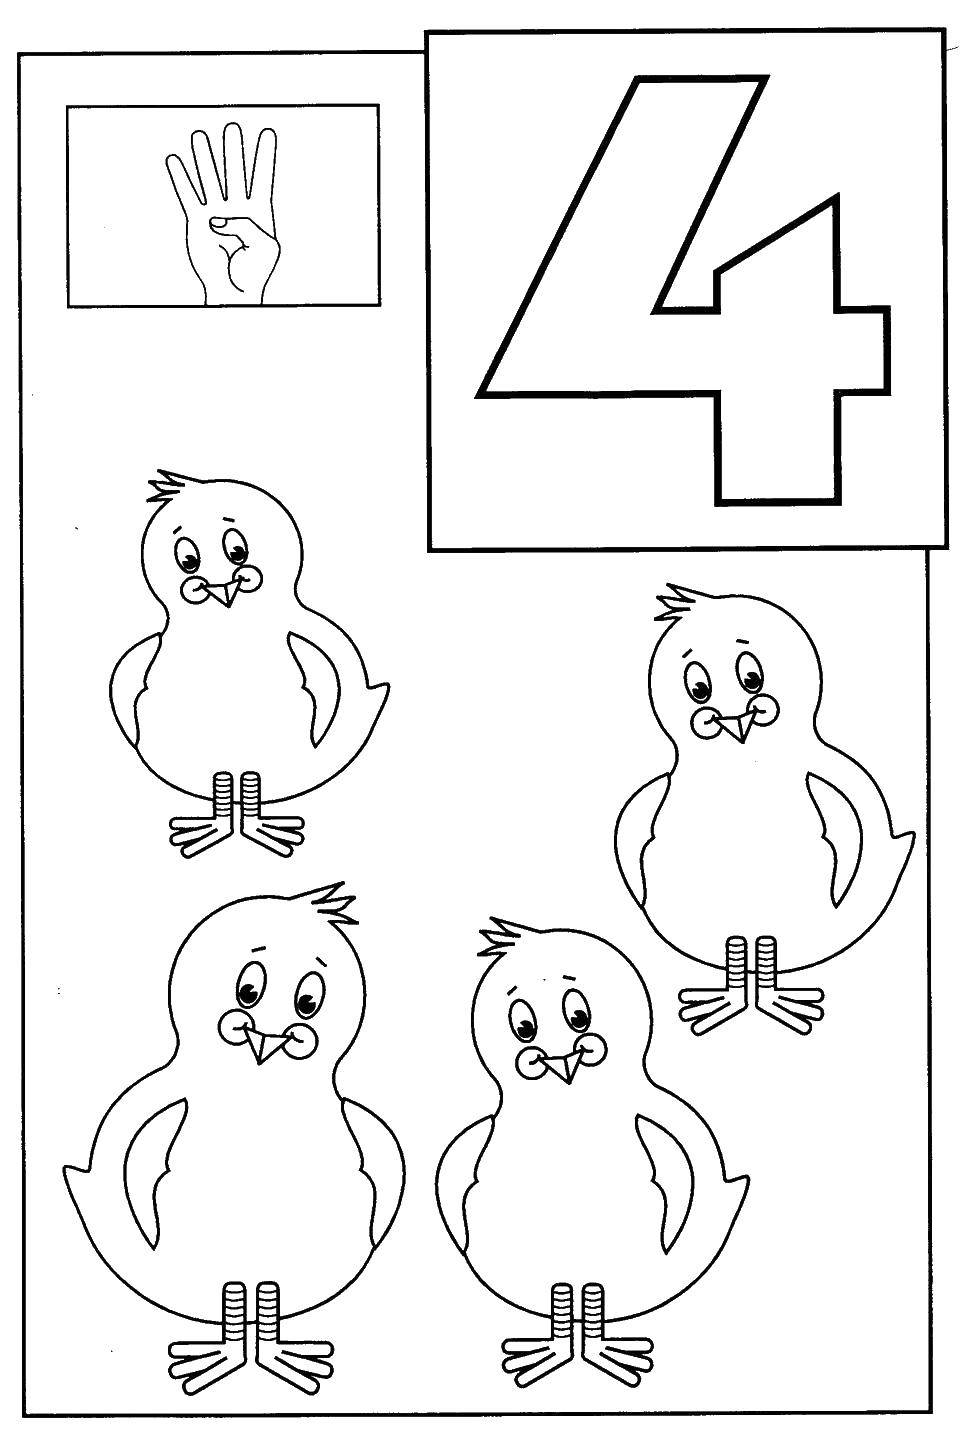 Coloring Four chicken. Category Learn to count. Tags:  numbers, counting, 4 chickens.